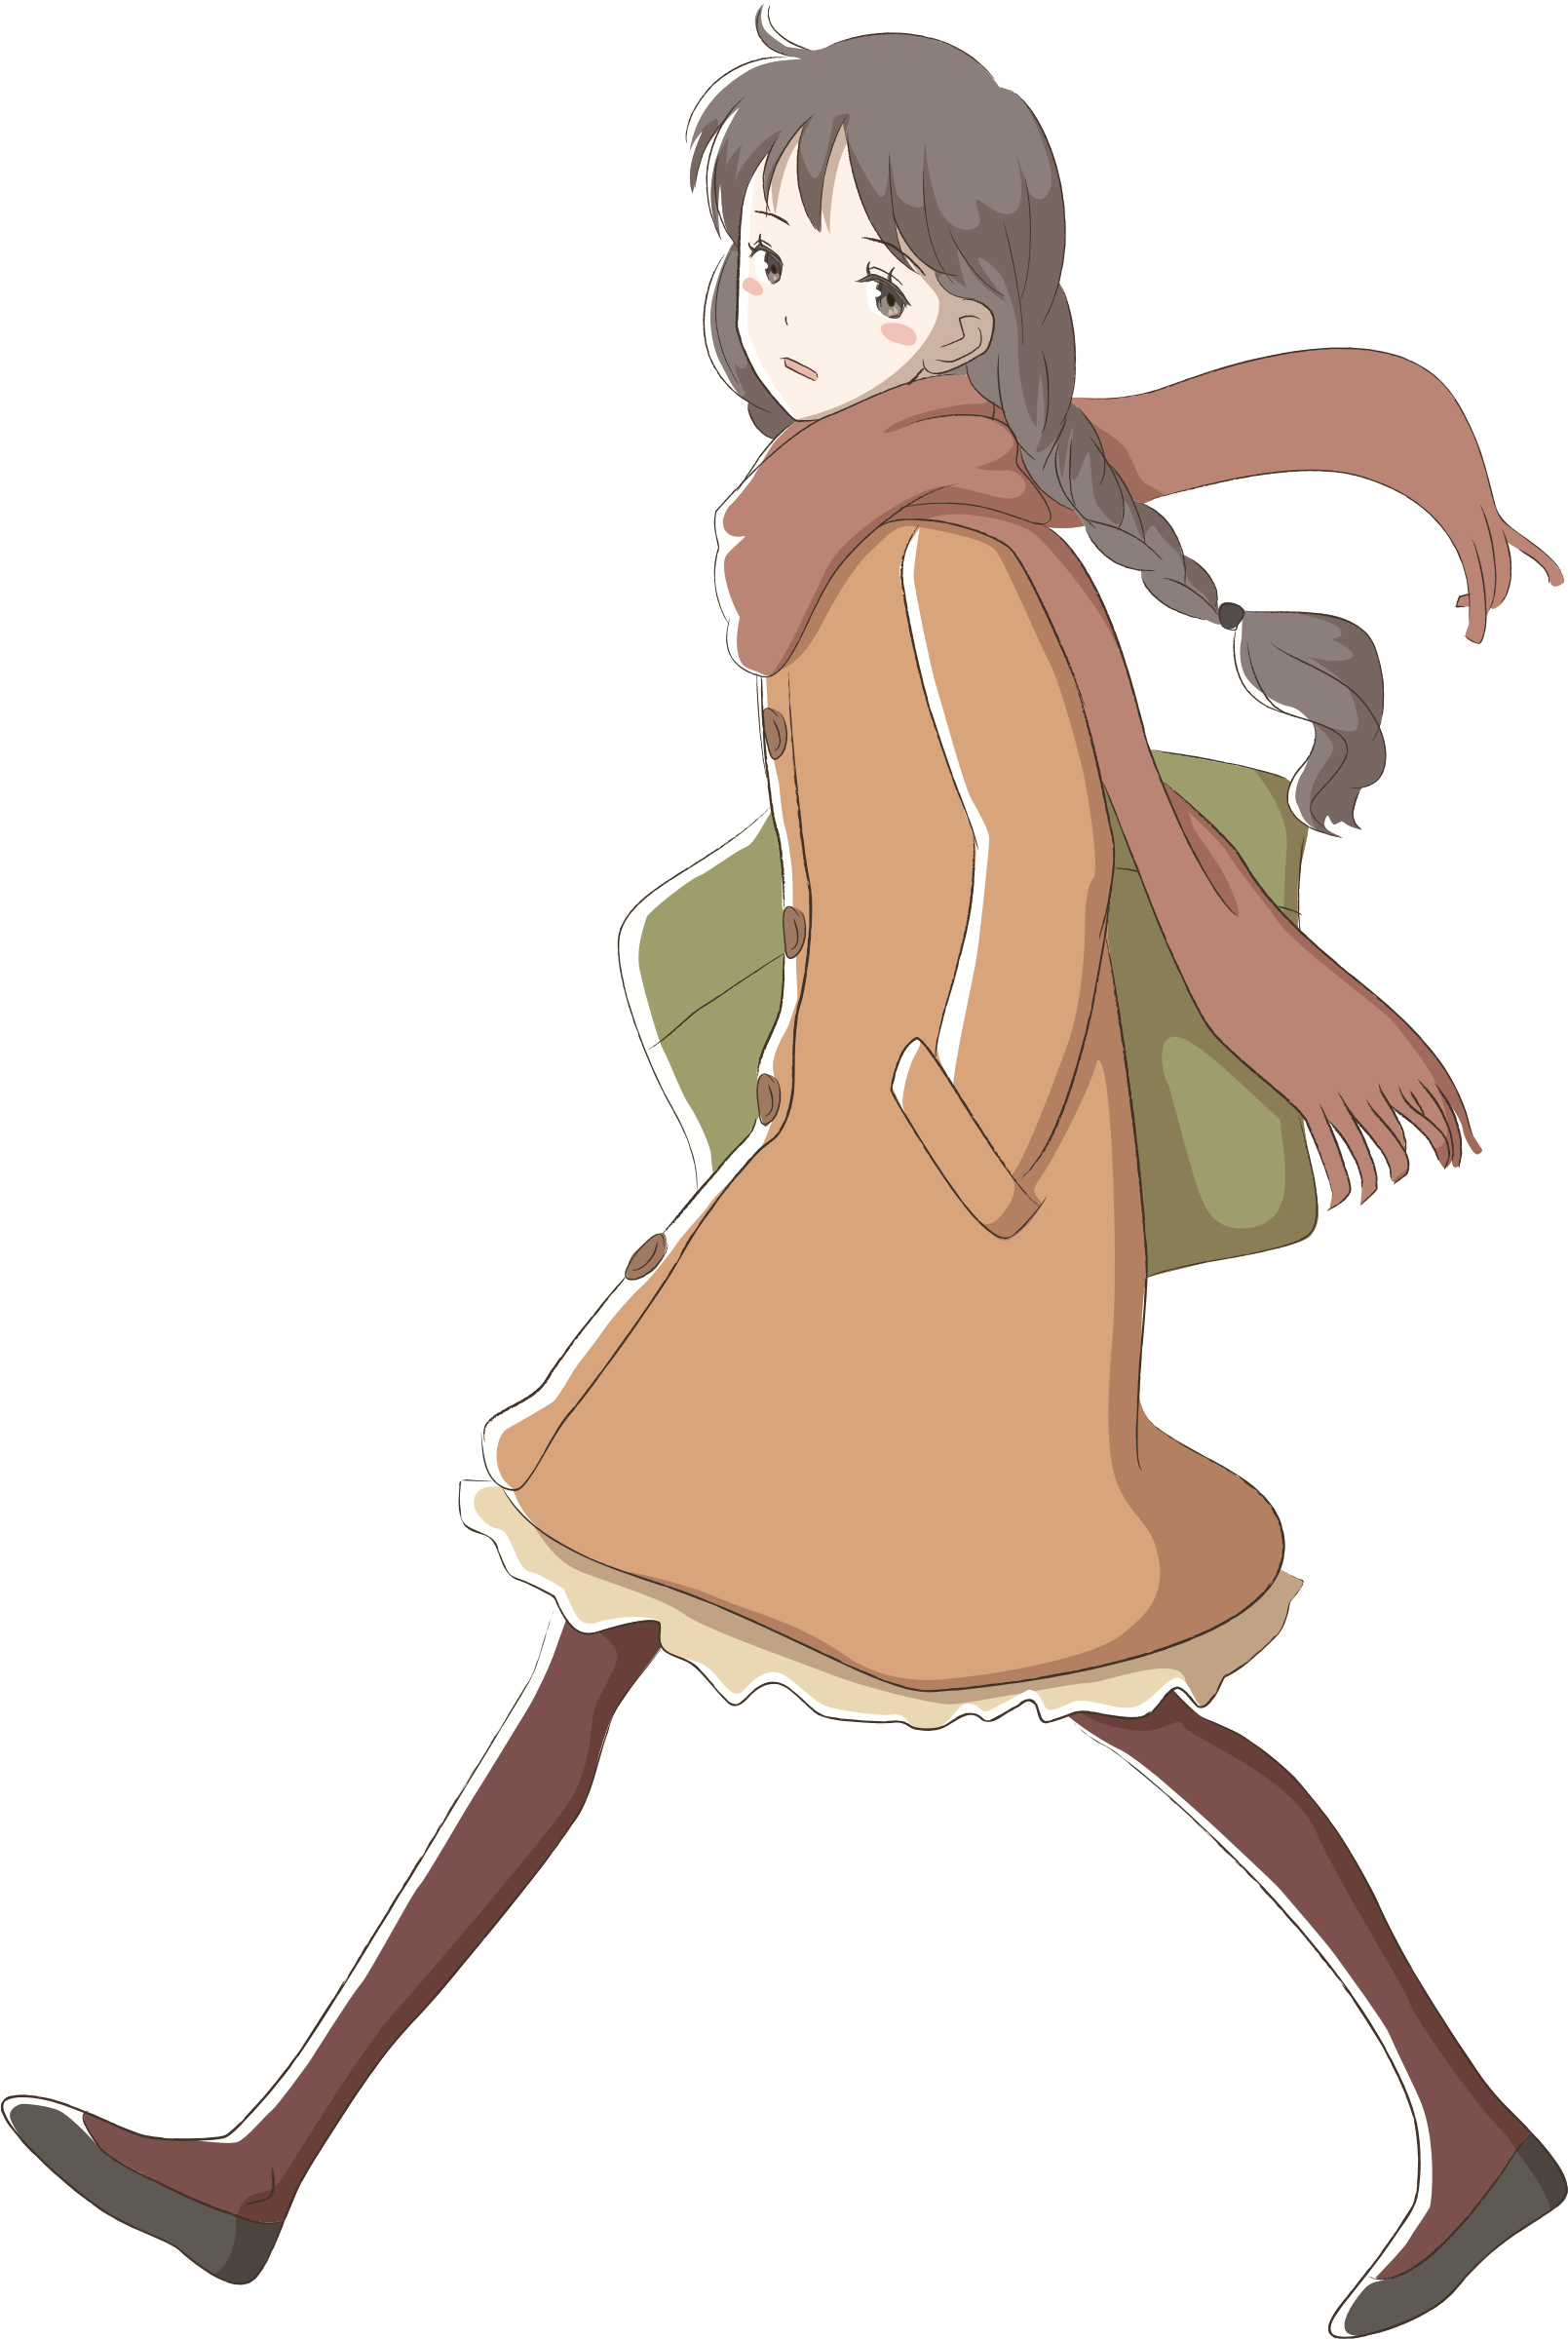 Big Image - Anime Girl Walking - (1609x2400) Png Clipart Download